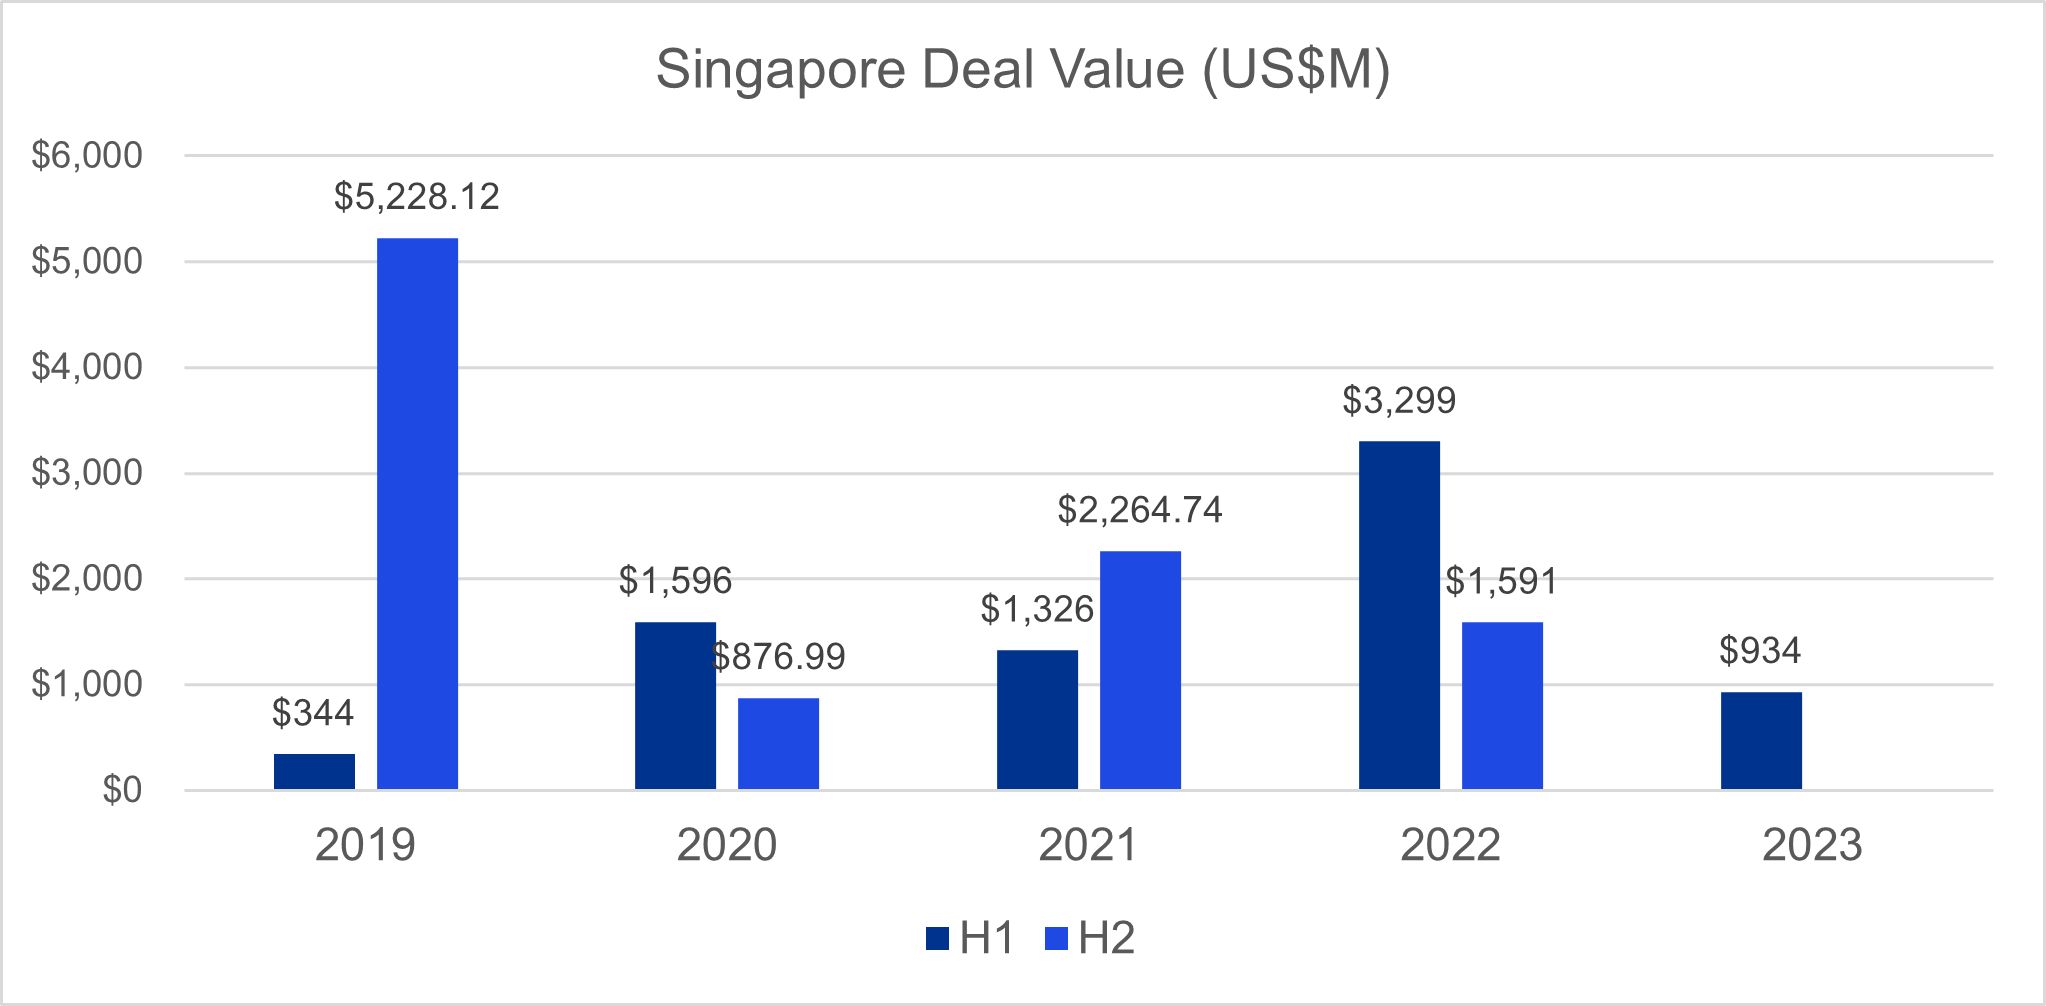 Figure 1: H1 Deal value for Singapore fintech funding from 2019 to 2023 in US dollars (Million)